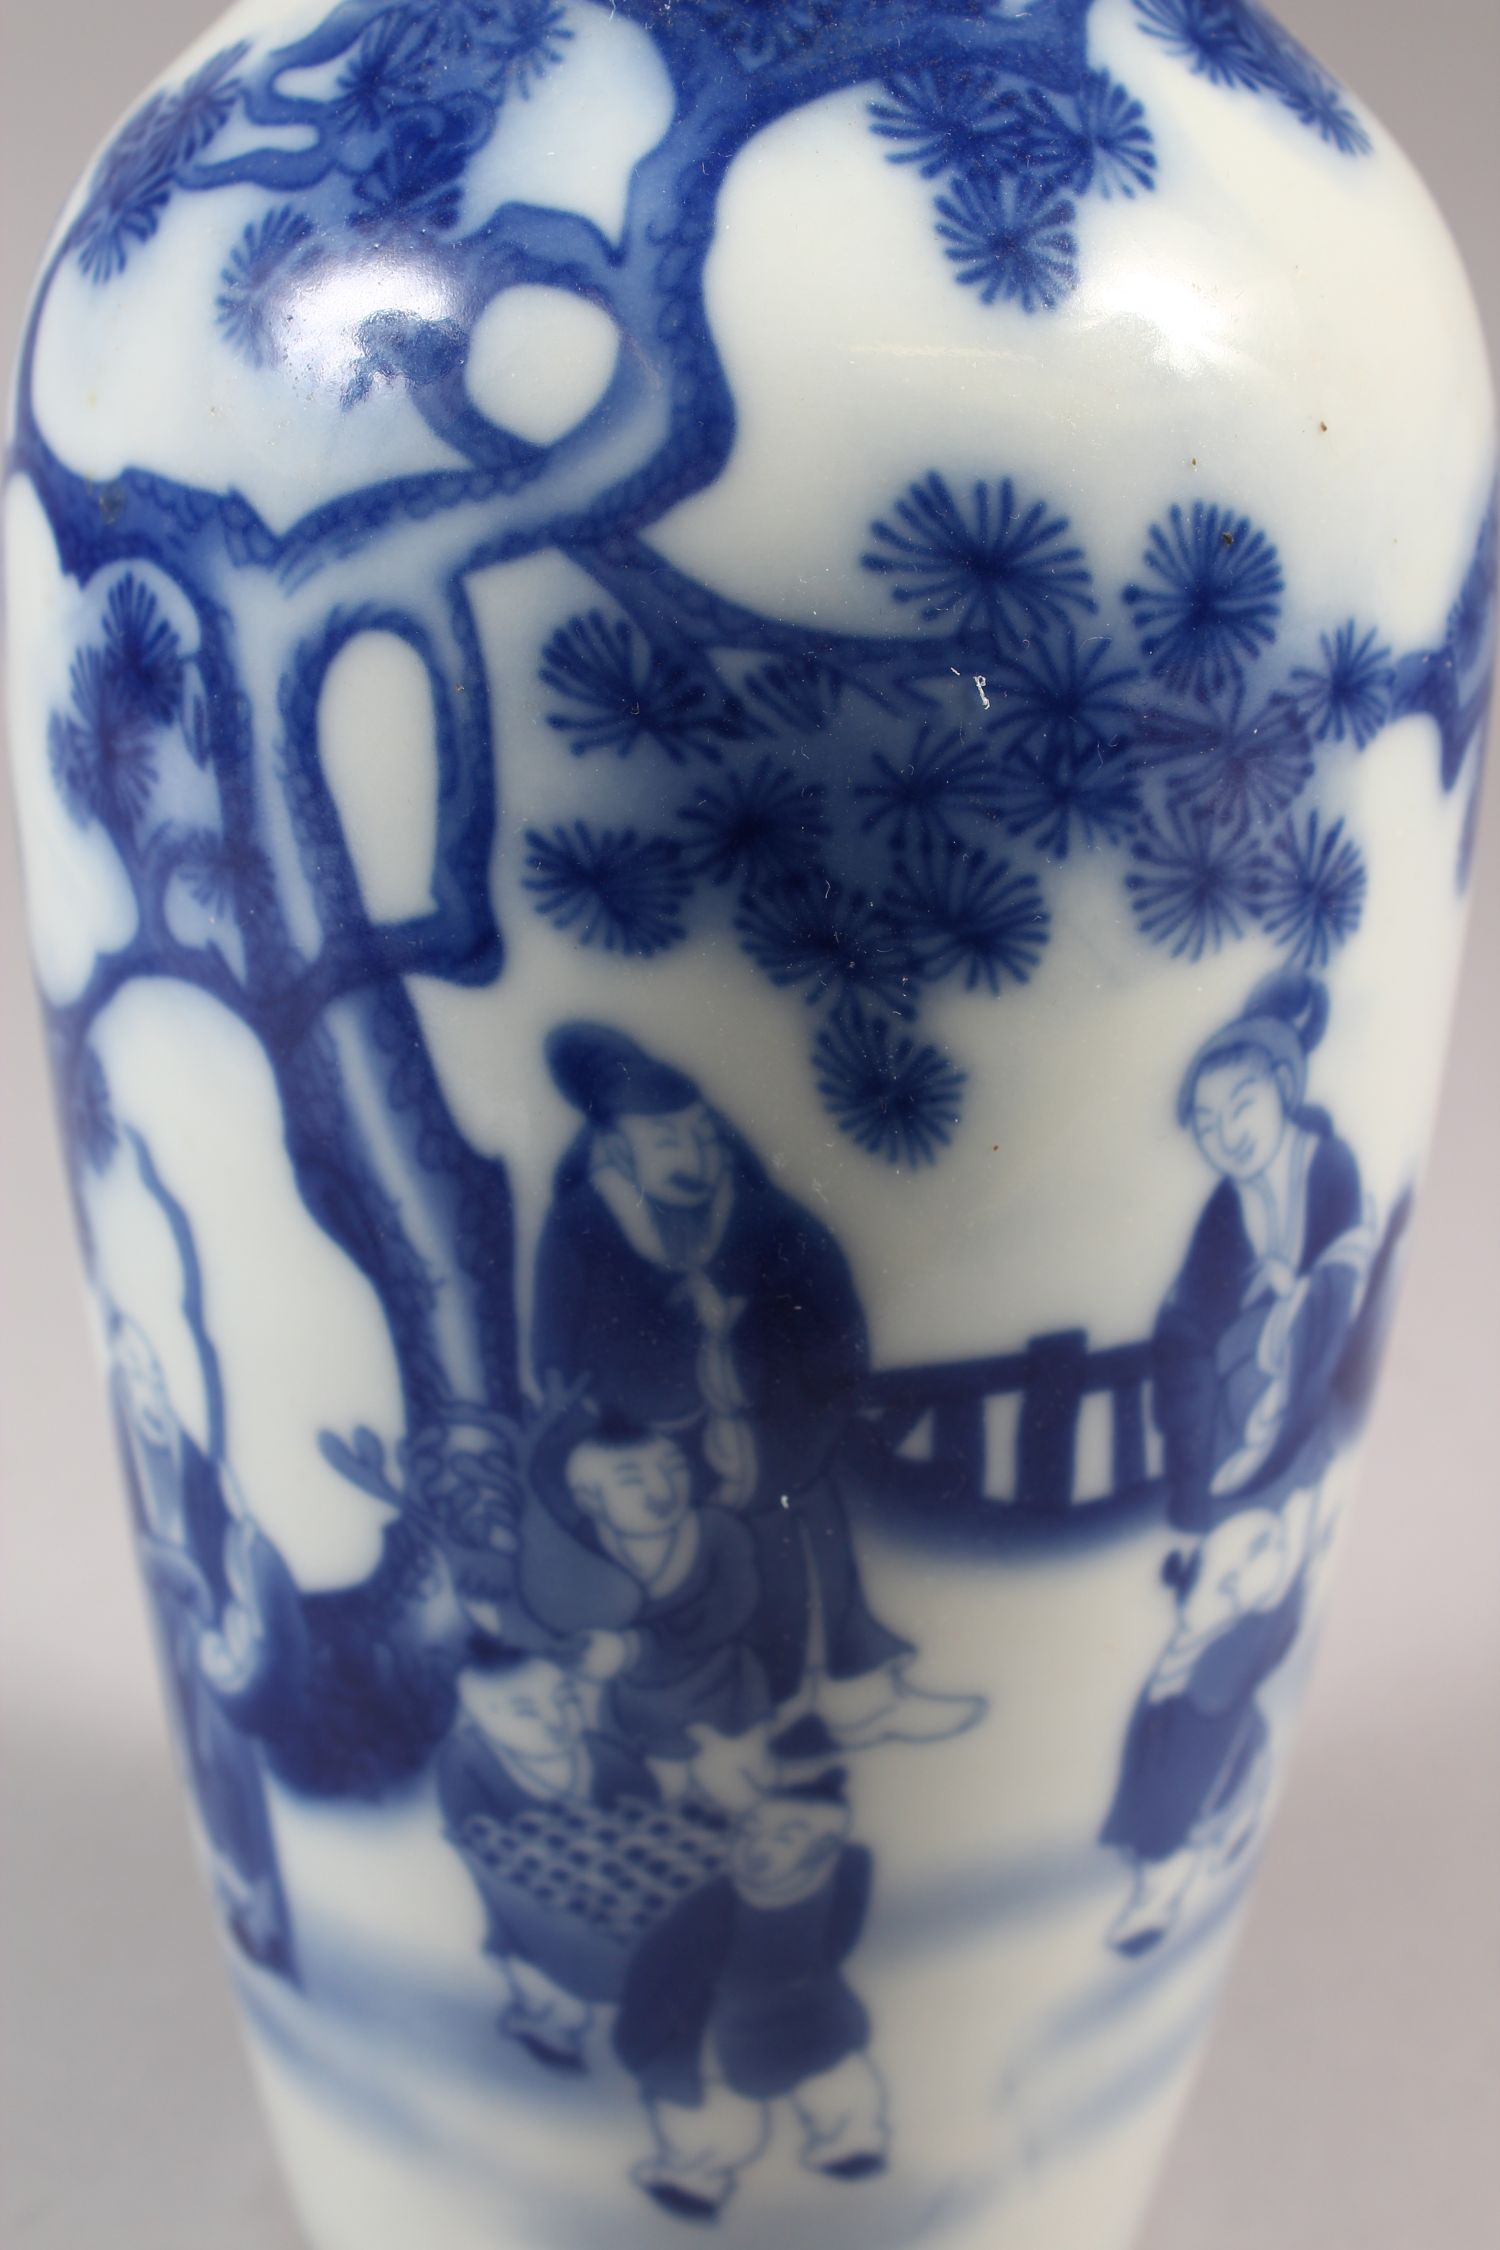 A SLENDER CHINESE BLUE AND WHITE PORCELAIN VASE, decorated with working locals surrounded by trees - Image 5 of 8